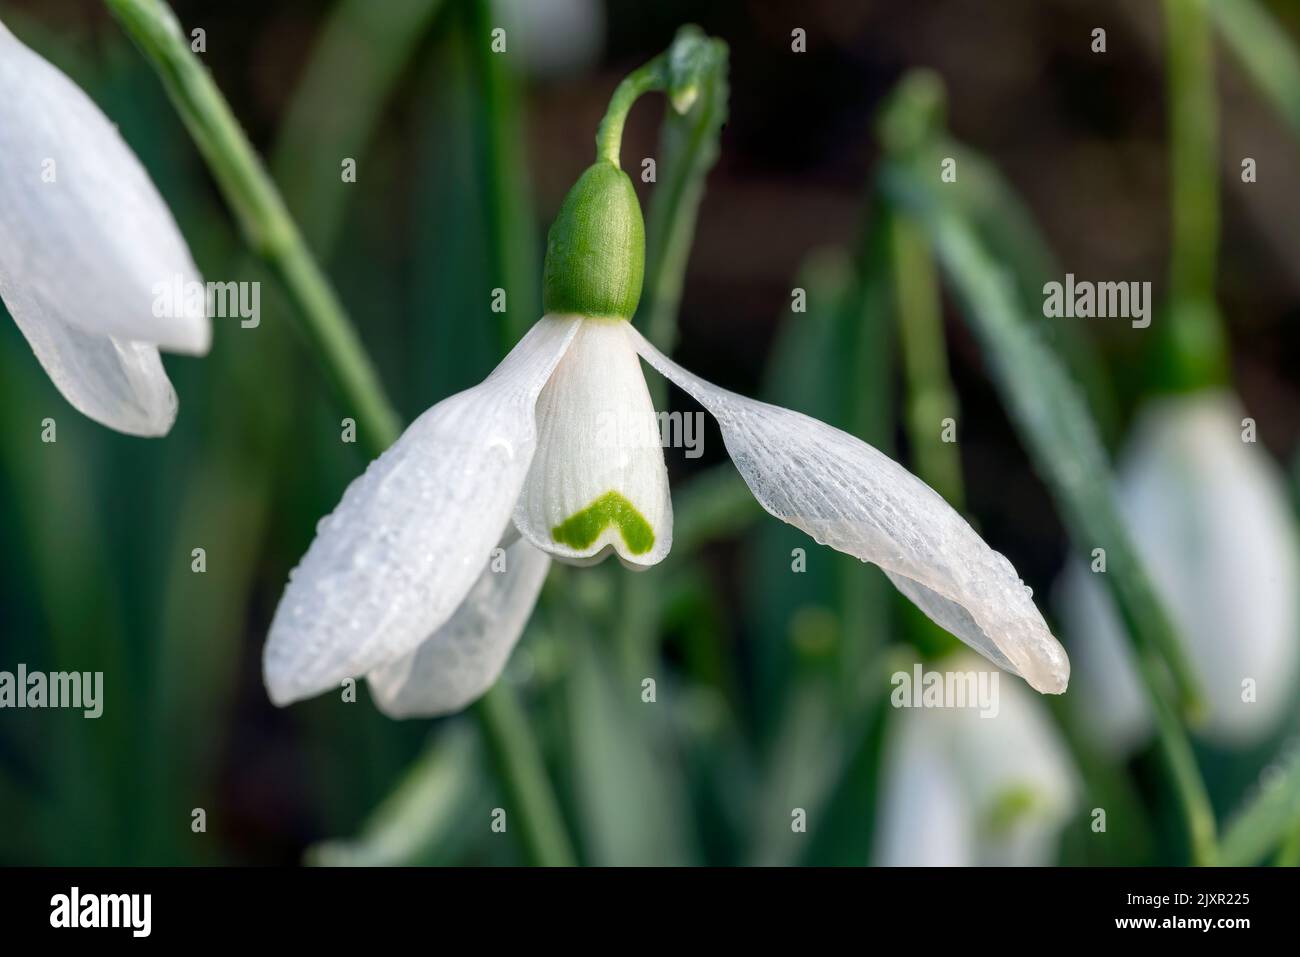 Snowdrop, galanthus elwesii 'Mrs Macnamara' an early winter spring bulbous flowering plant with a white springtime flower which opens in January and F Stock Photo